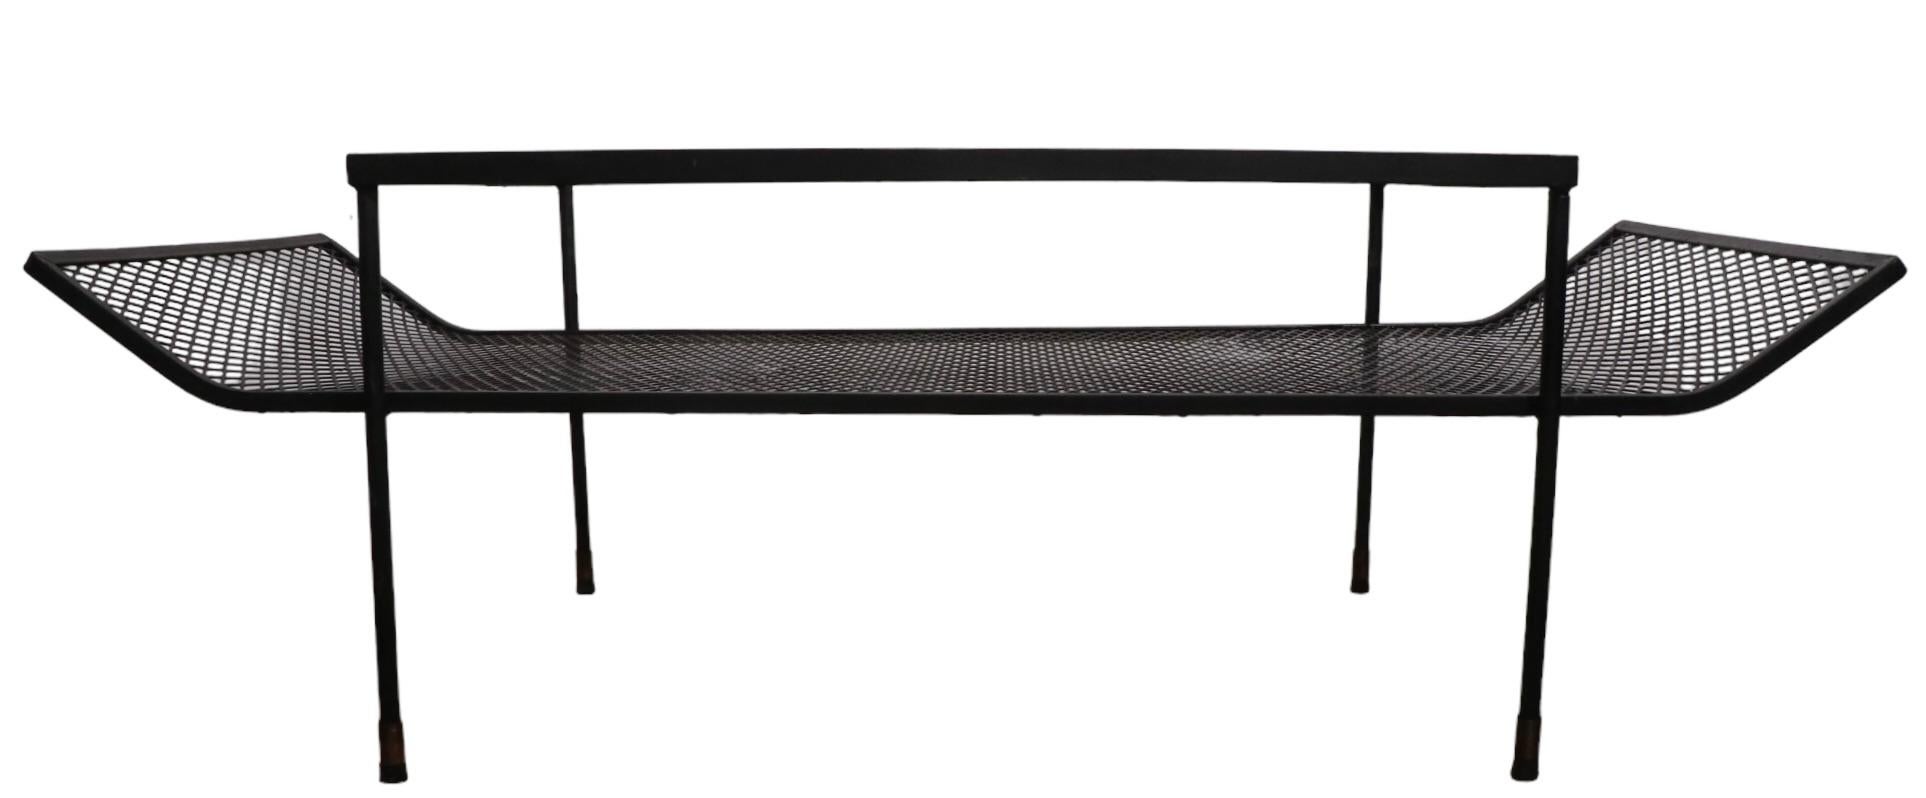  Architectural Mid-Century Wrought Iron and Glass Coffee Table Att. to Woodard  For Sale 4